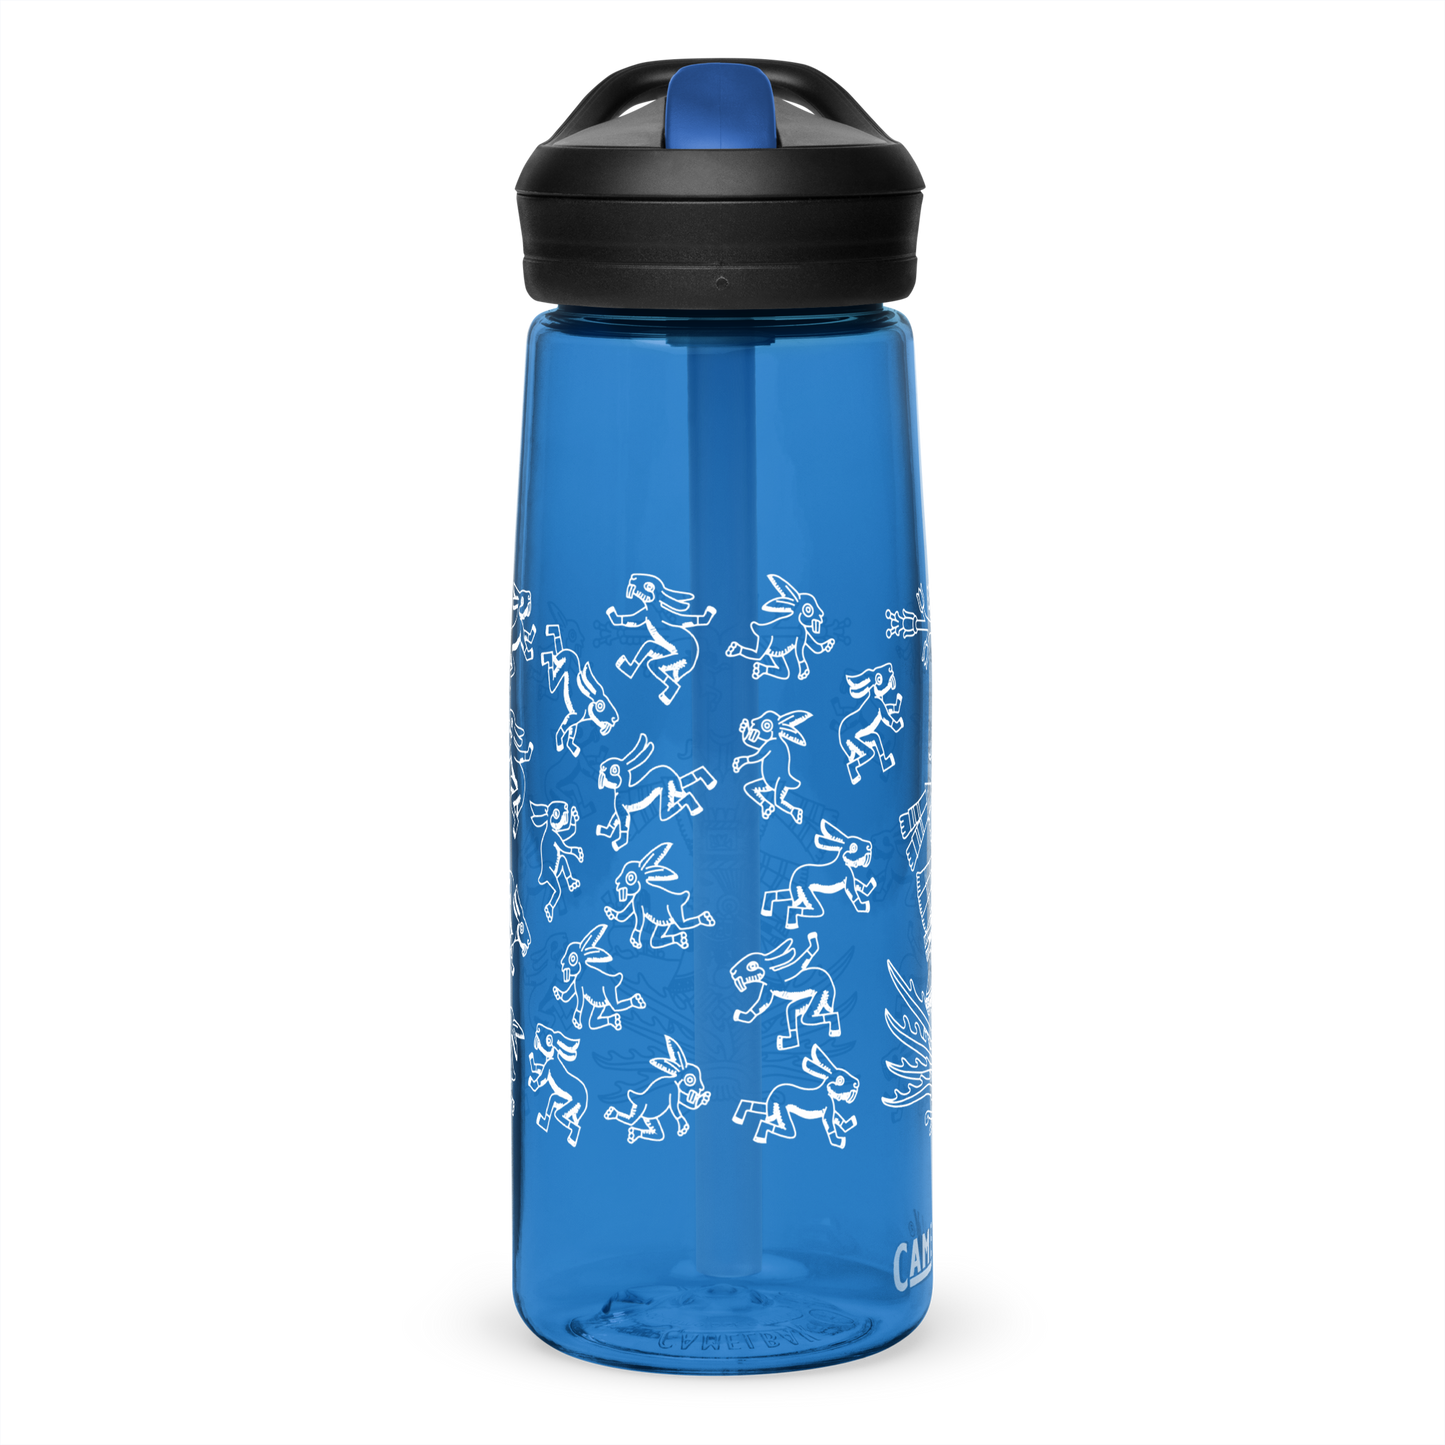 Mayahuel y Centzon (400) Totochtin (Rabbits) - Camelbak® Sports Water Bottle (3 colors)